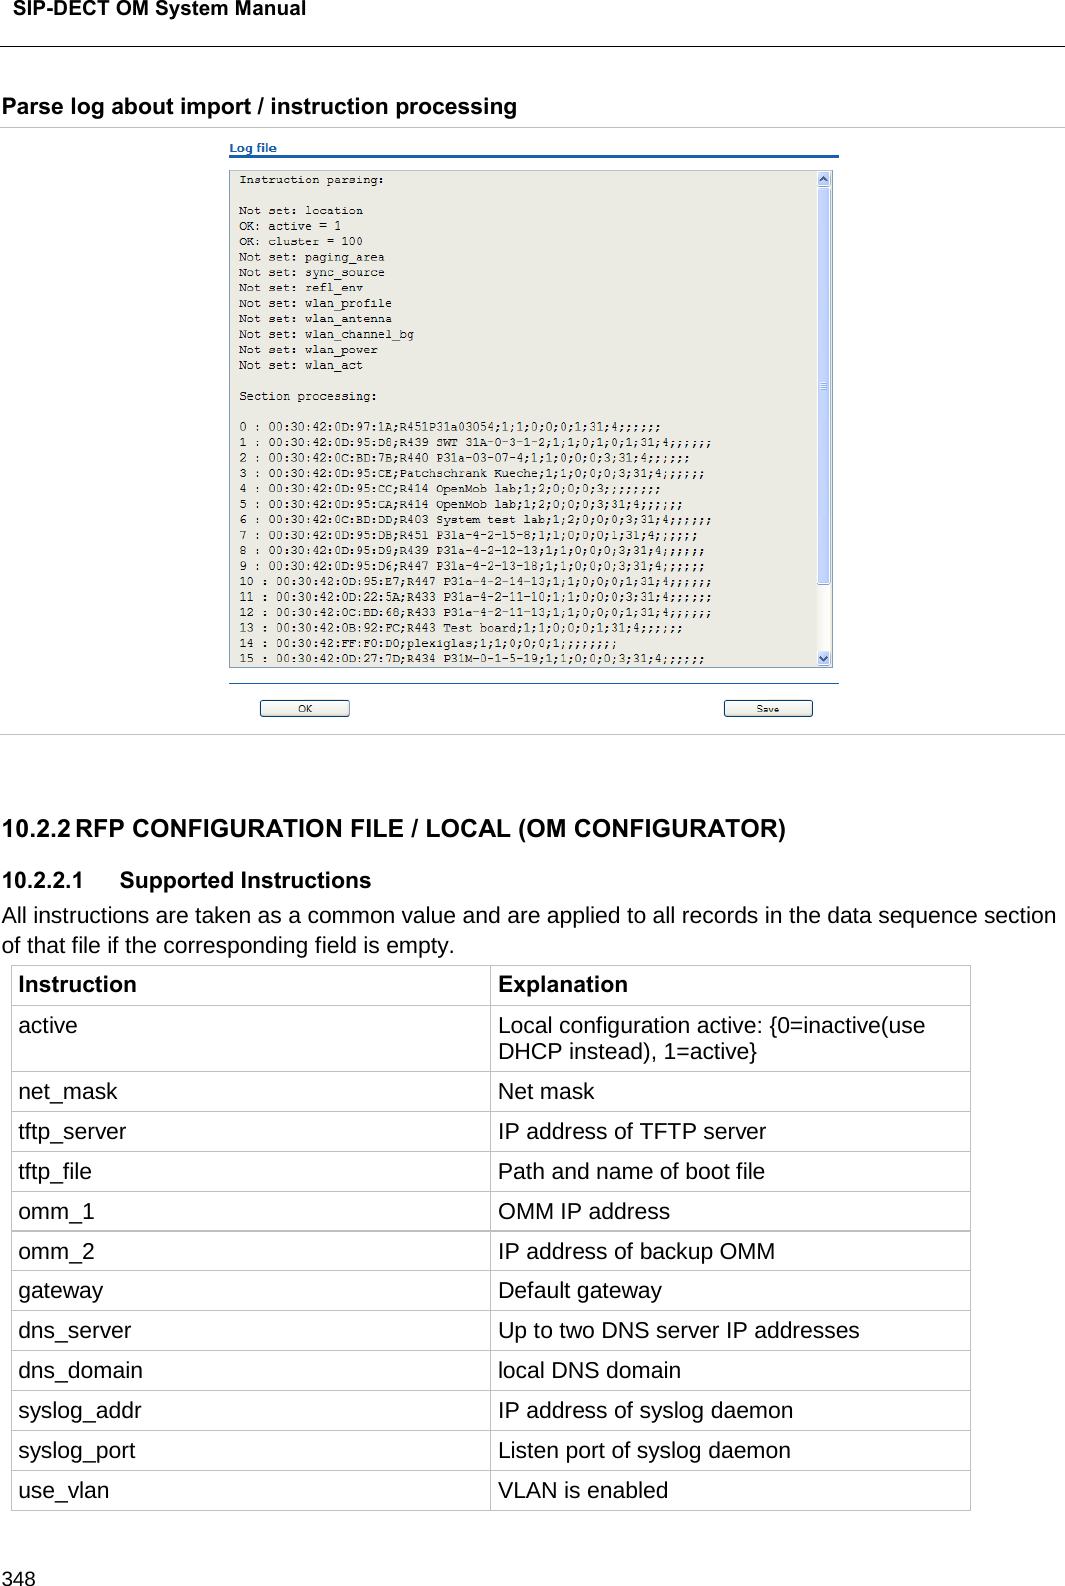  SIP-DECT OM System Manual    348 Parse log about import / instruction processing   10.2.2 RFP CONFIGURATION FILE / LOCAL (OM CONFIGURATOR) 10.2.2.1 Supported Instructions All instructions are taken as a common value and are applied to all records in the data sequence section of that file if the corresponding field is empty. Instruction Explanation active Local configuration active: {0=inactive(use DHCP instead), 1=active} net_mask Net mask tftp_server IP address of TFTP server tftp_file Path and name of boot file omm_1 OMM IP address omm_2 IP address of backup OMM gateway Default gateway dns_server Up to two DNS server IP addresses dns_domain local DNS domain syslog_addr IP address of syslog daemon syslog_port Listen port of syslog daemon use_vlan VLAN is enabled 